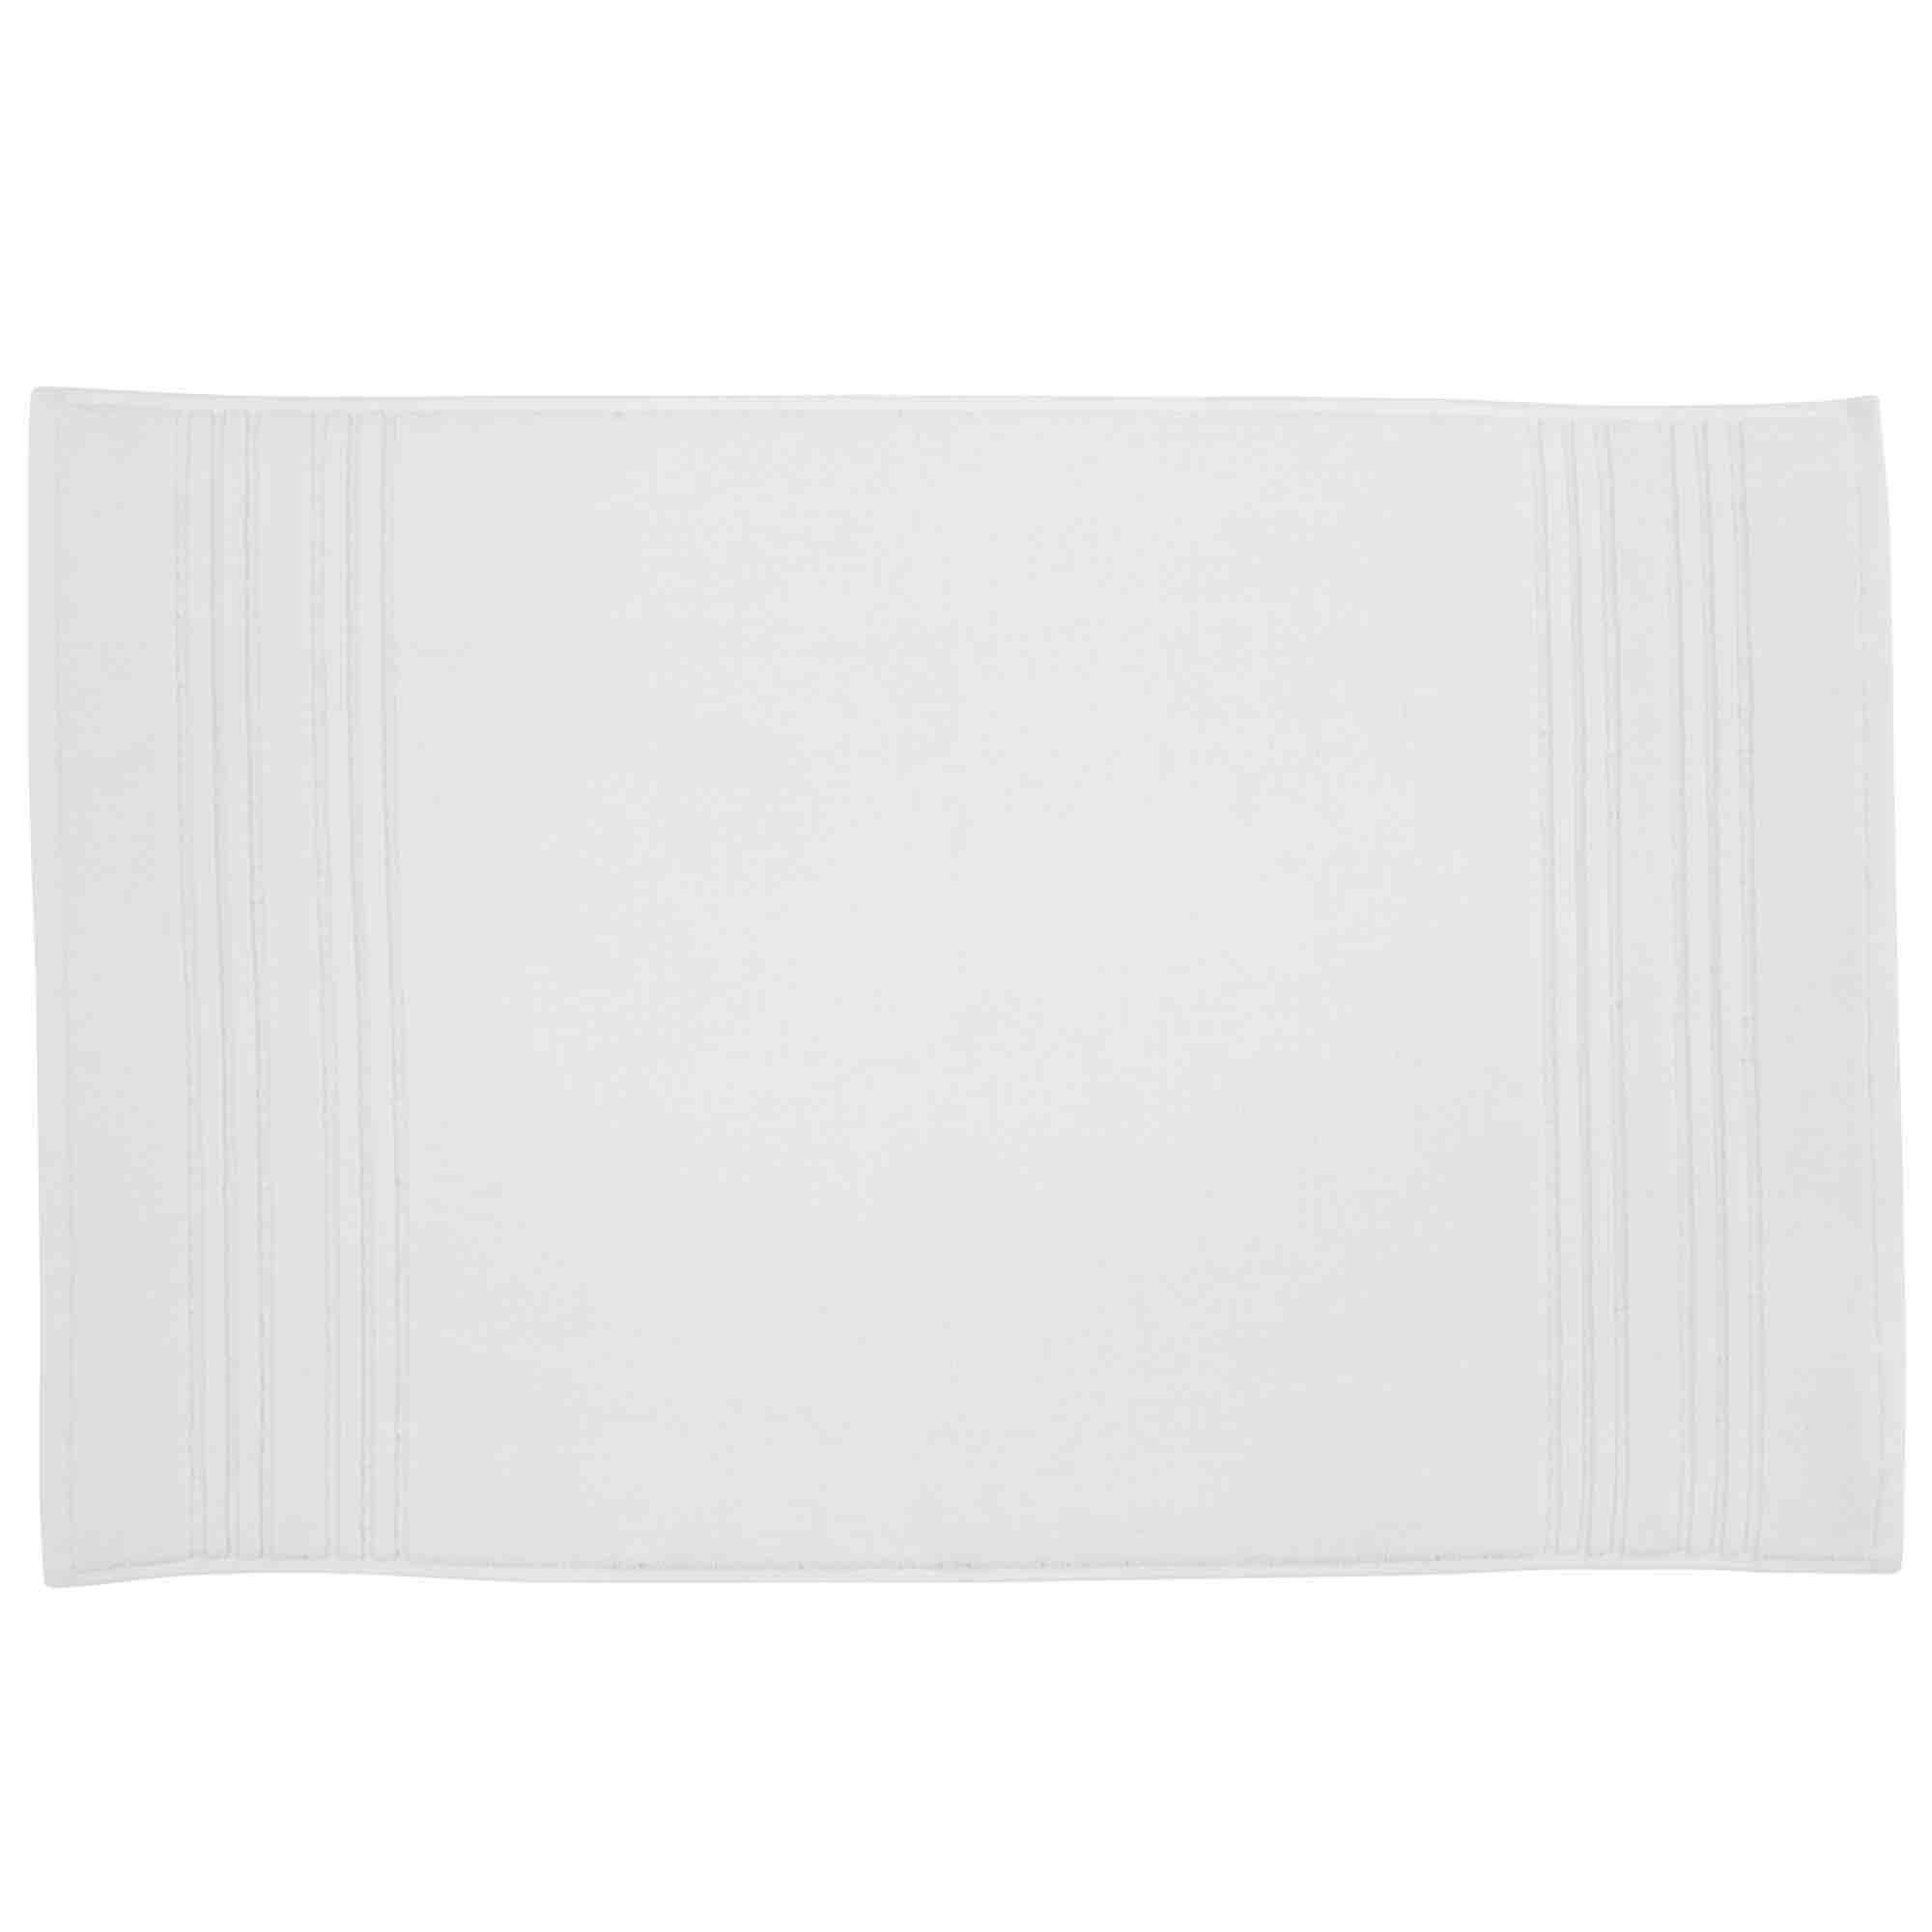 Christy Serene Combed Cotton Towel - White